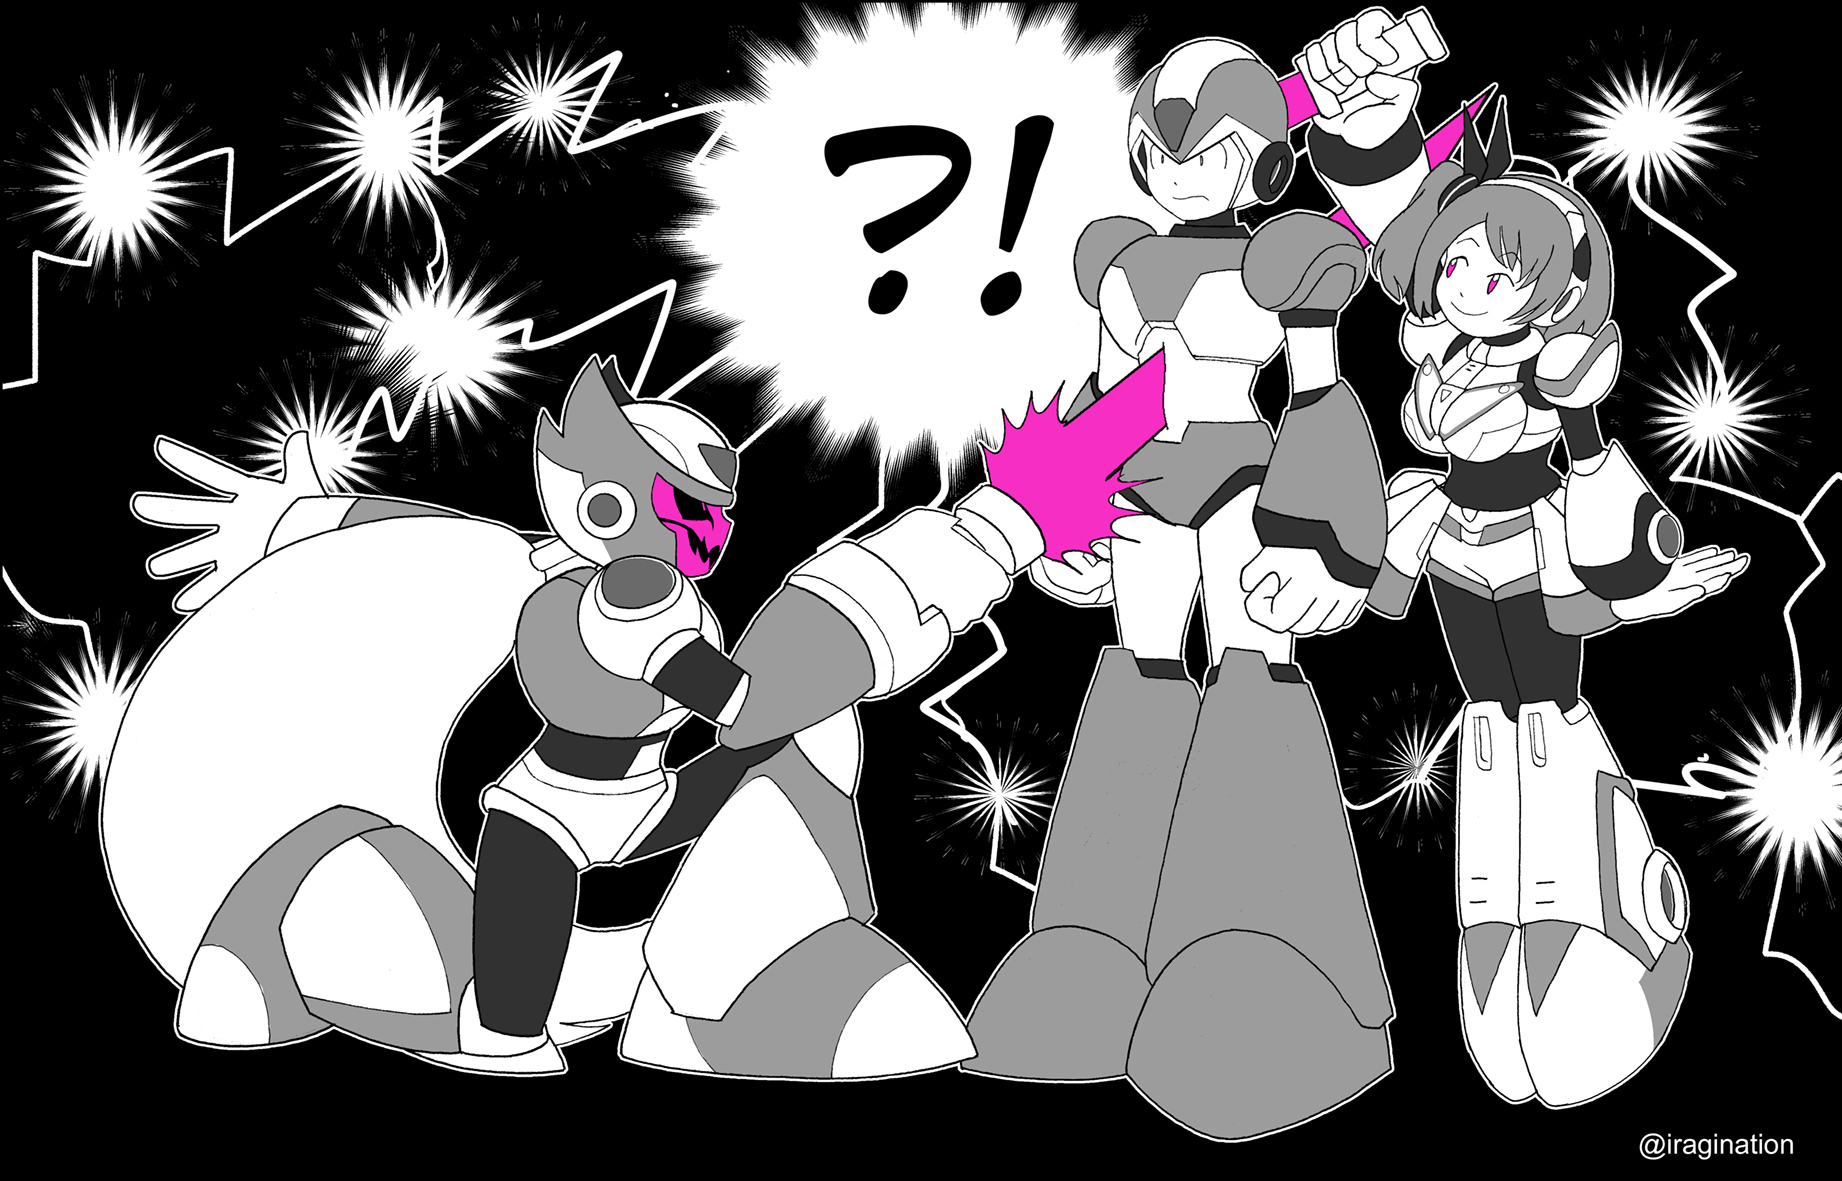 Betrayed Again
Perhaps I shouldn’t laugh but I find this stuff hilarious.

This is the full size version of the second panel in my [url=https://www.iragination.com/illust/displayimage.php?pid=603]previous post[/url].

Mega Man X DiVE © CAPCOM
Keywords: x rico via